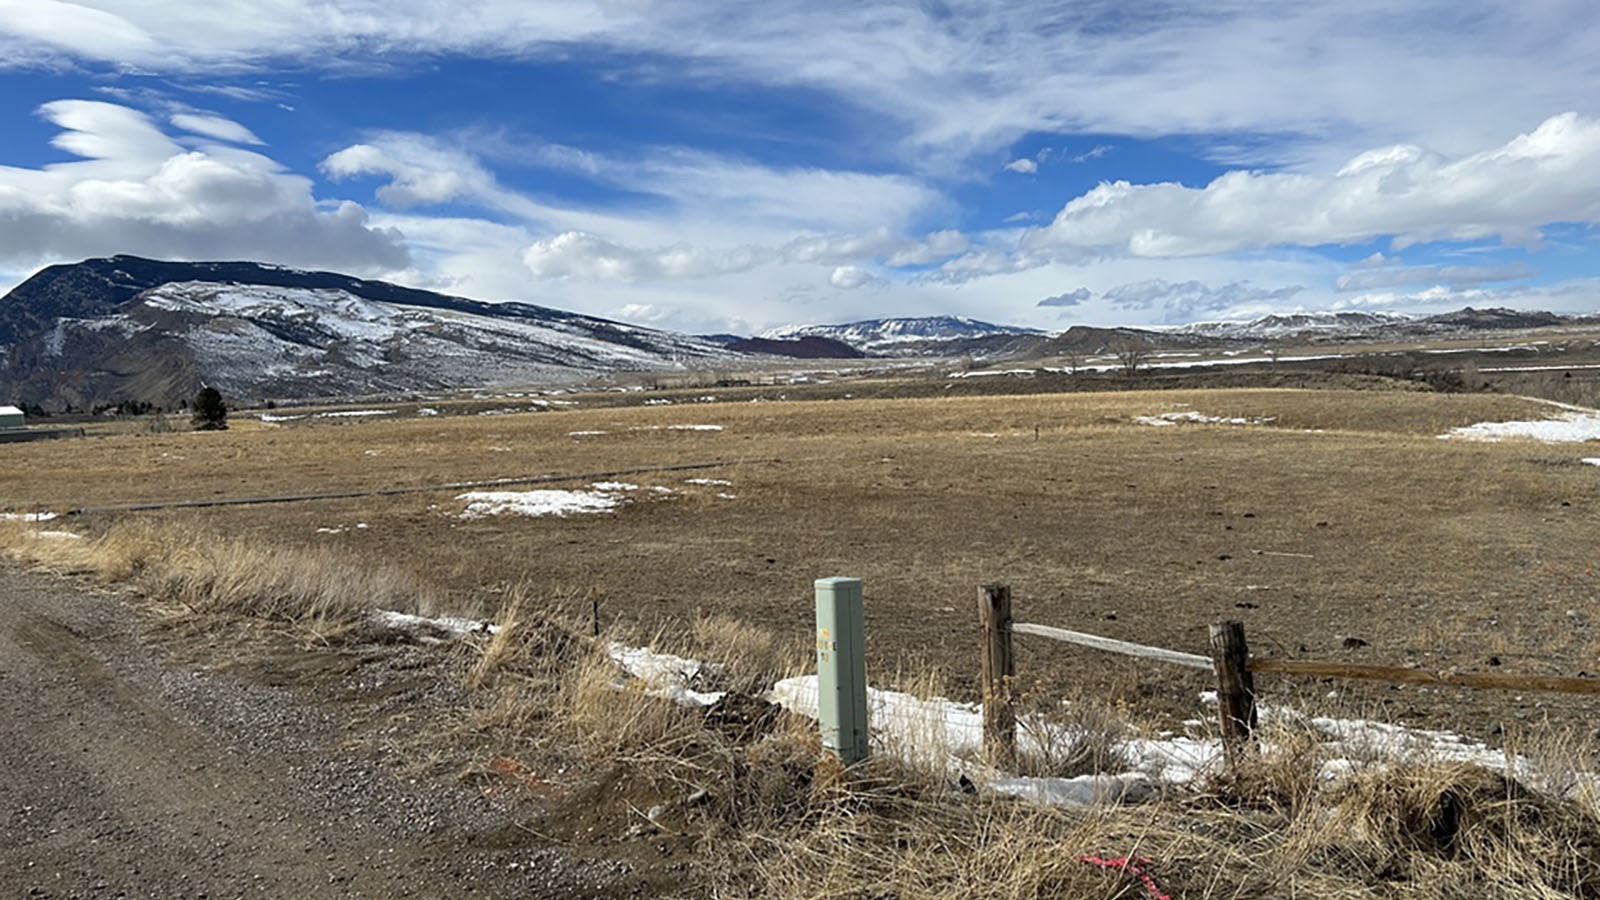 A Mormon temple is proposed for this lot in Cody, Wyoming.